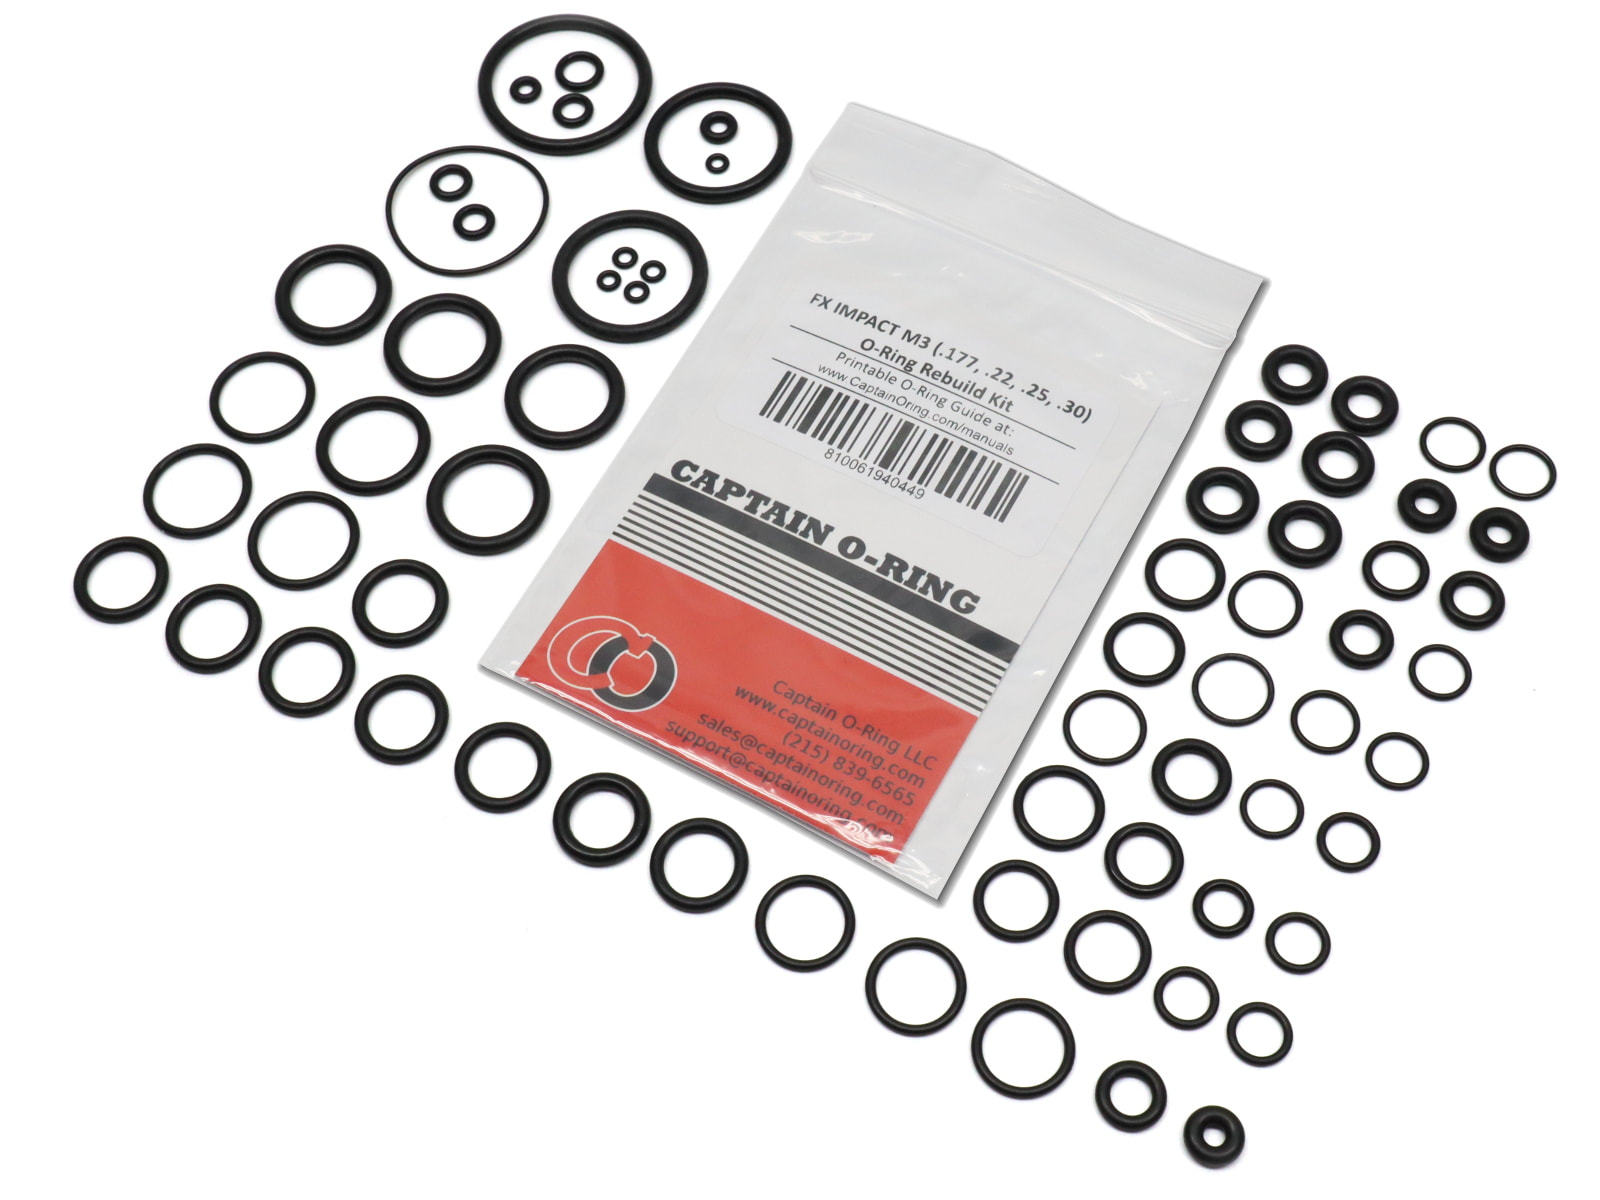 Captain O-Ring - FX Impact M3 (.177/.22/.25/.30) Complete 68 Piece O-Ring  Rebuild Kit